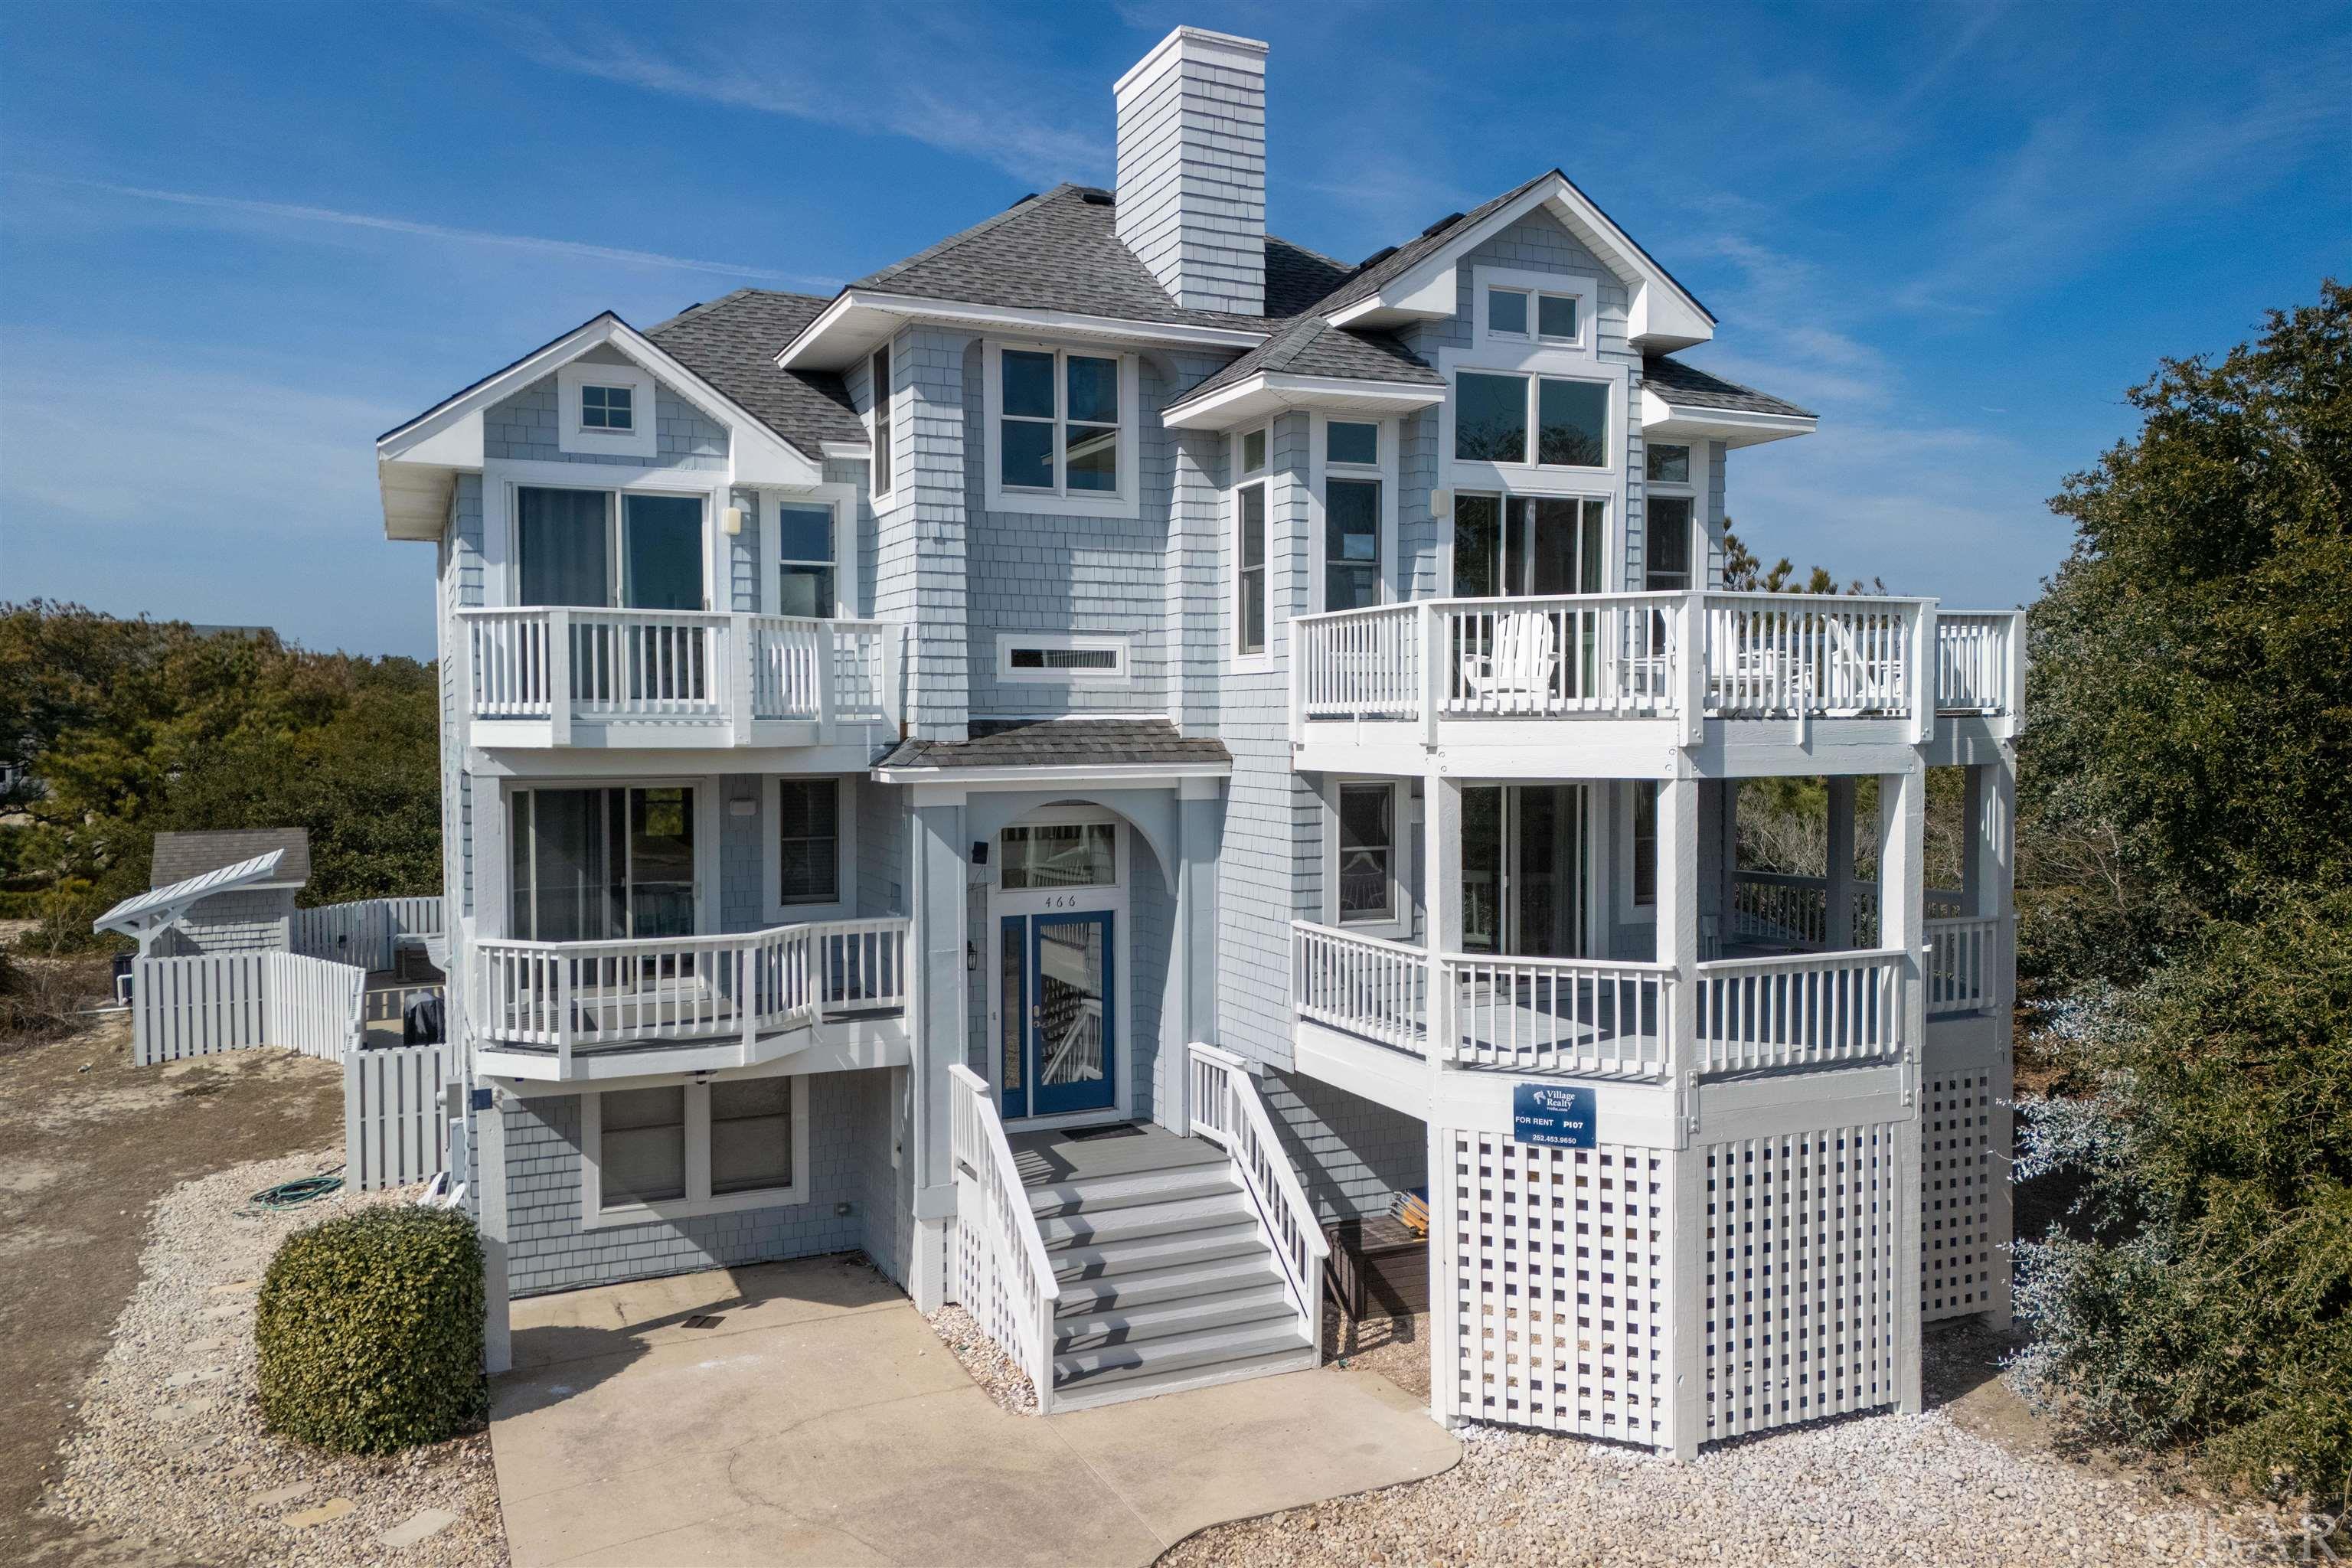 Absolutely captivating, this prestigious Pine Island home with 8 bedrooms and 7 full, 2 half baths is a coastal haven just steps from the beach. Luxurious vinyl plank flooring welcomes you, while the top floor’s open plan and abundant windows offer breathtaking views. The chef’s kitchen features double dishwashers and ovens, complemented by a ships watch and new top-floor decking. Six en suite bedrooms ensure comfort, and the game room with a kitchenette, pool table, and Pac-Man provides endless entertainment. Outside, a saltwater pool, hot tub, and oasis beckon, complemented by a cabana bathroom and outdoor shower. Meticulously maintained, this gem in Pine Island grants exclusive access to pools, tennis, and more. Embrace coastal luxury in the premier neighborhood of Corolla.